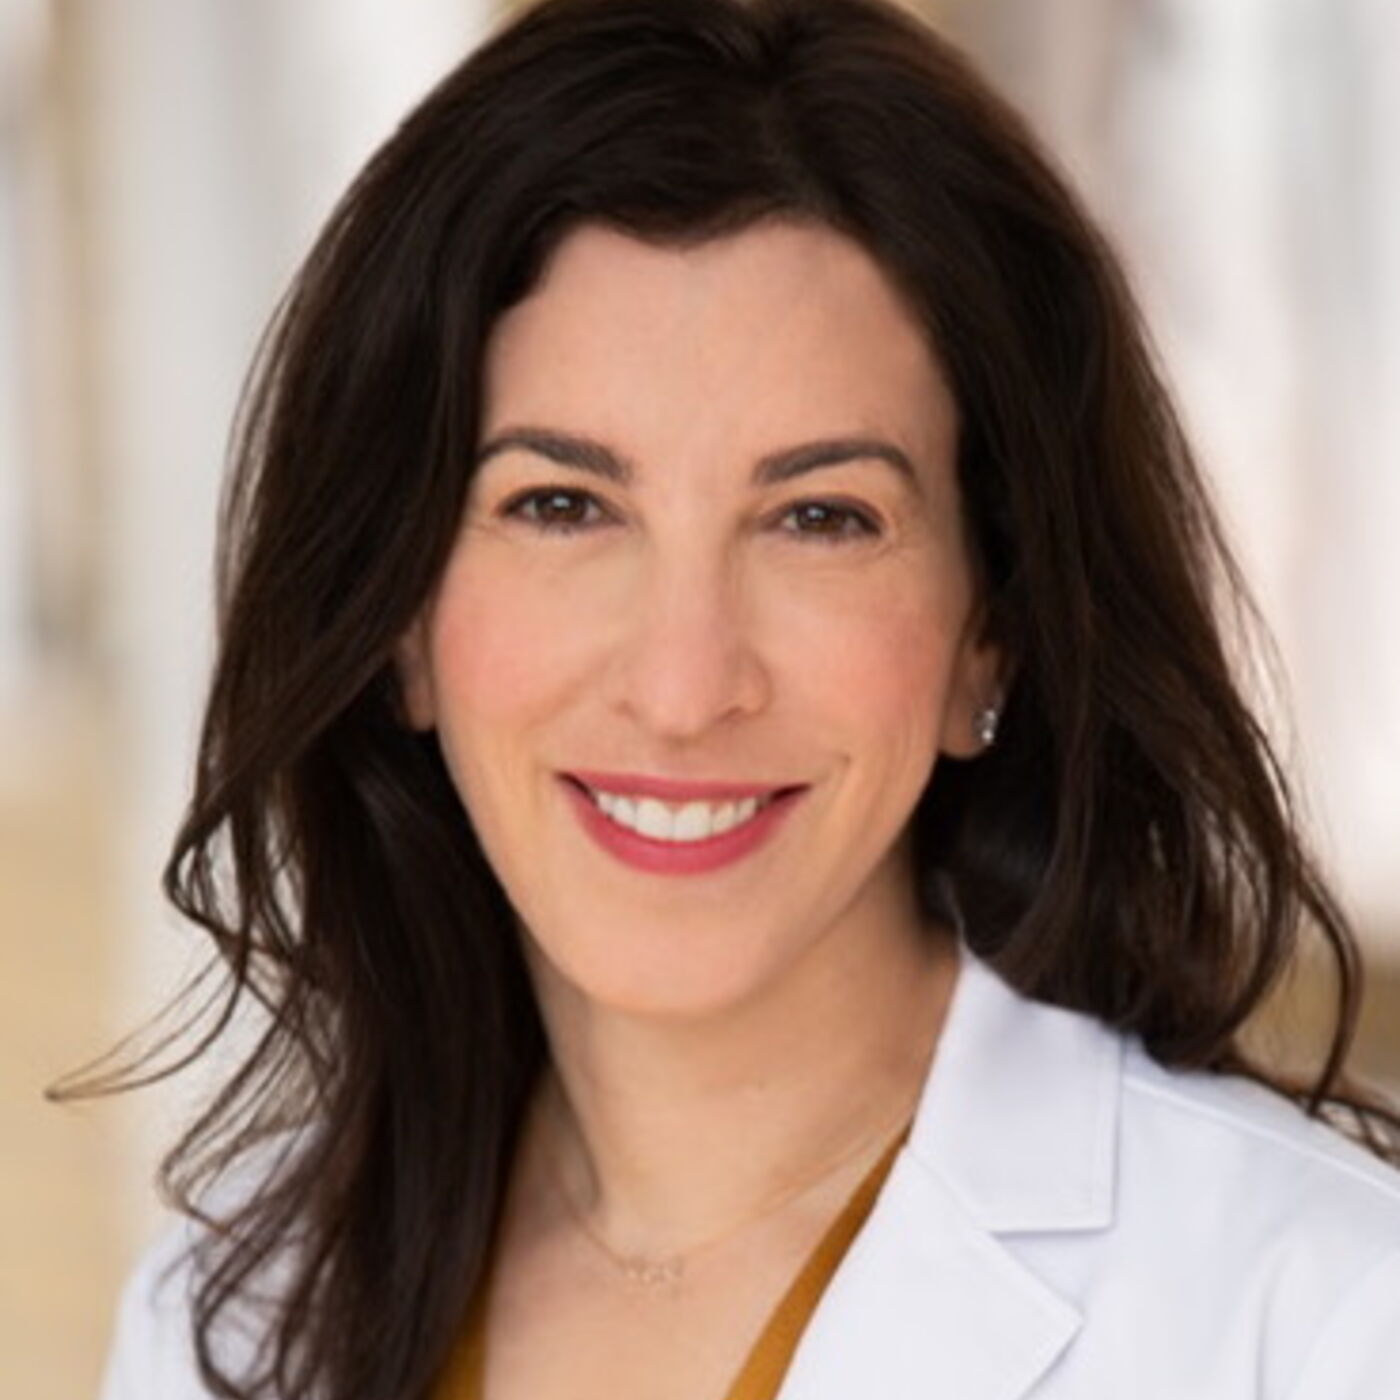 Dr. Elyse Scheuer – Summer Skin Care, Acne, and Anti-Aging Basics